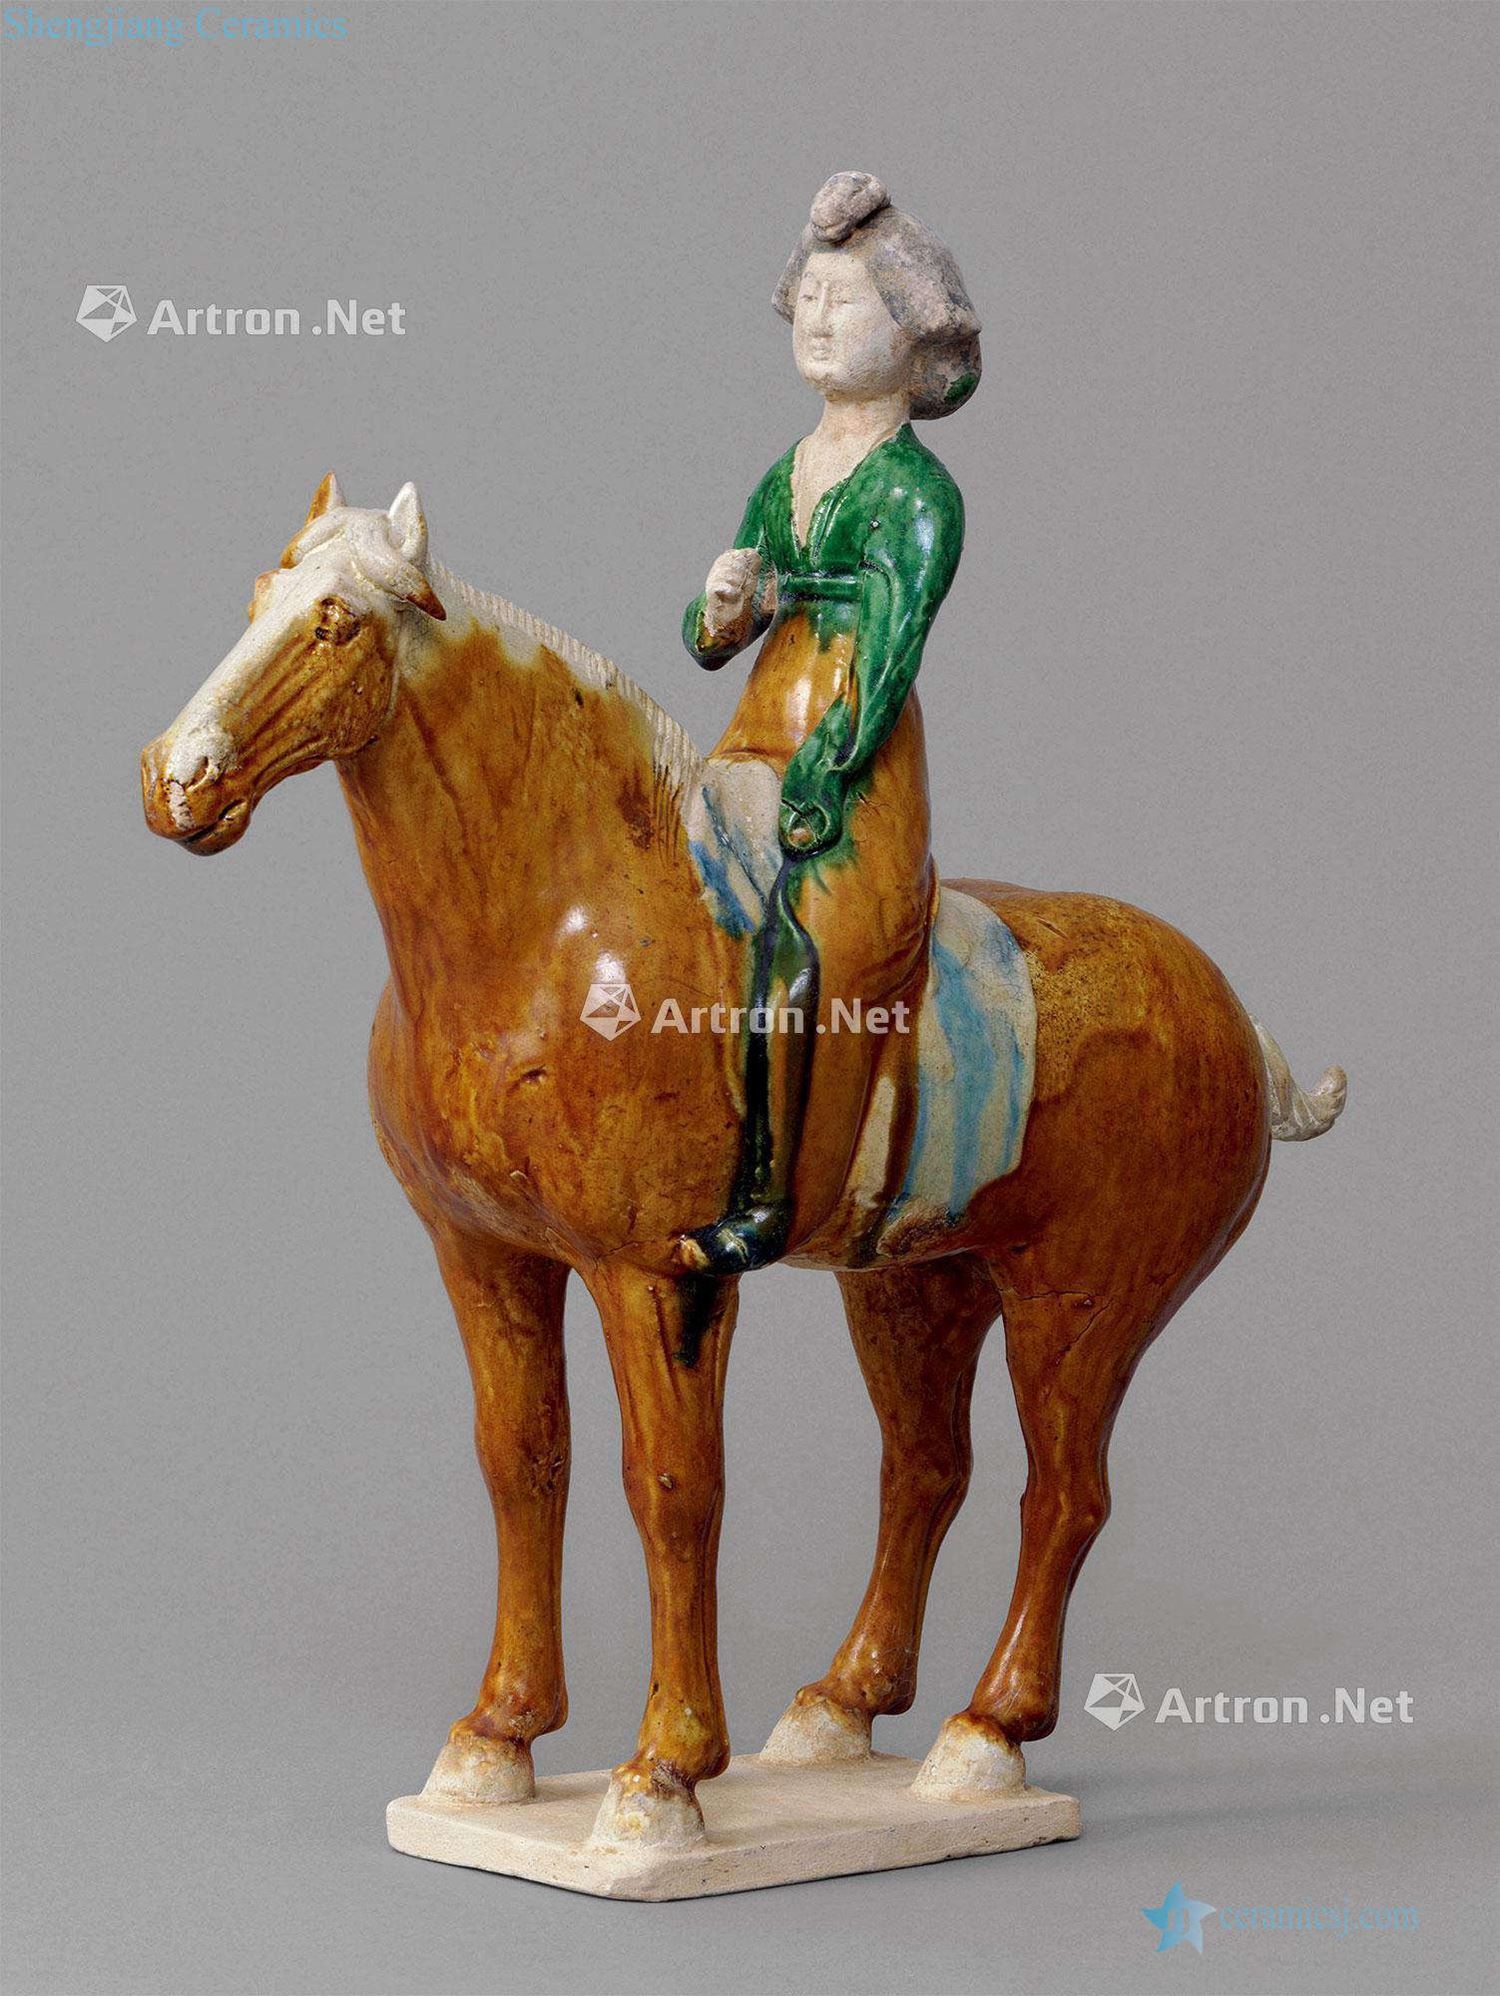 Tang painting traditional Chinese figurines on horseback